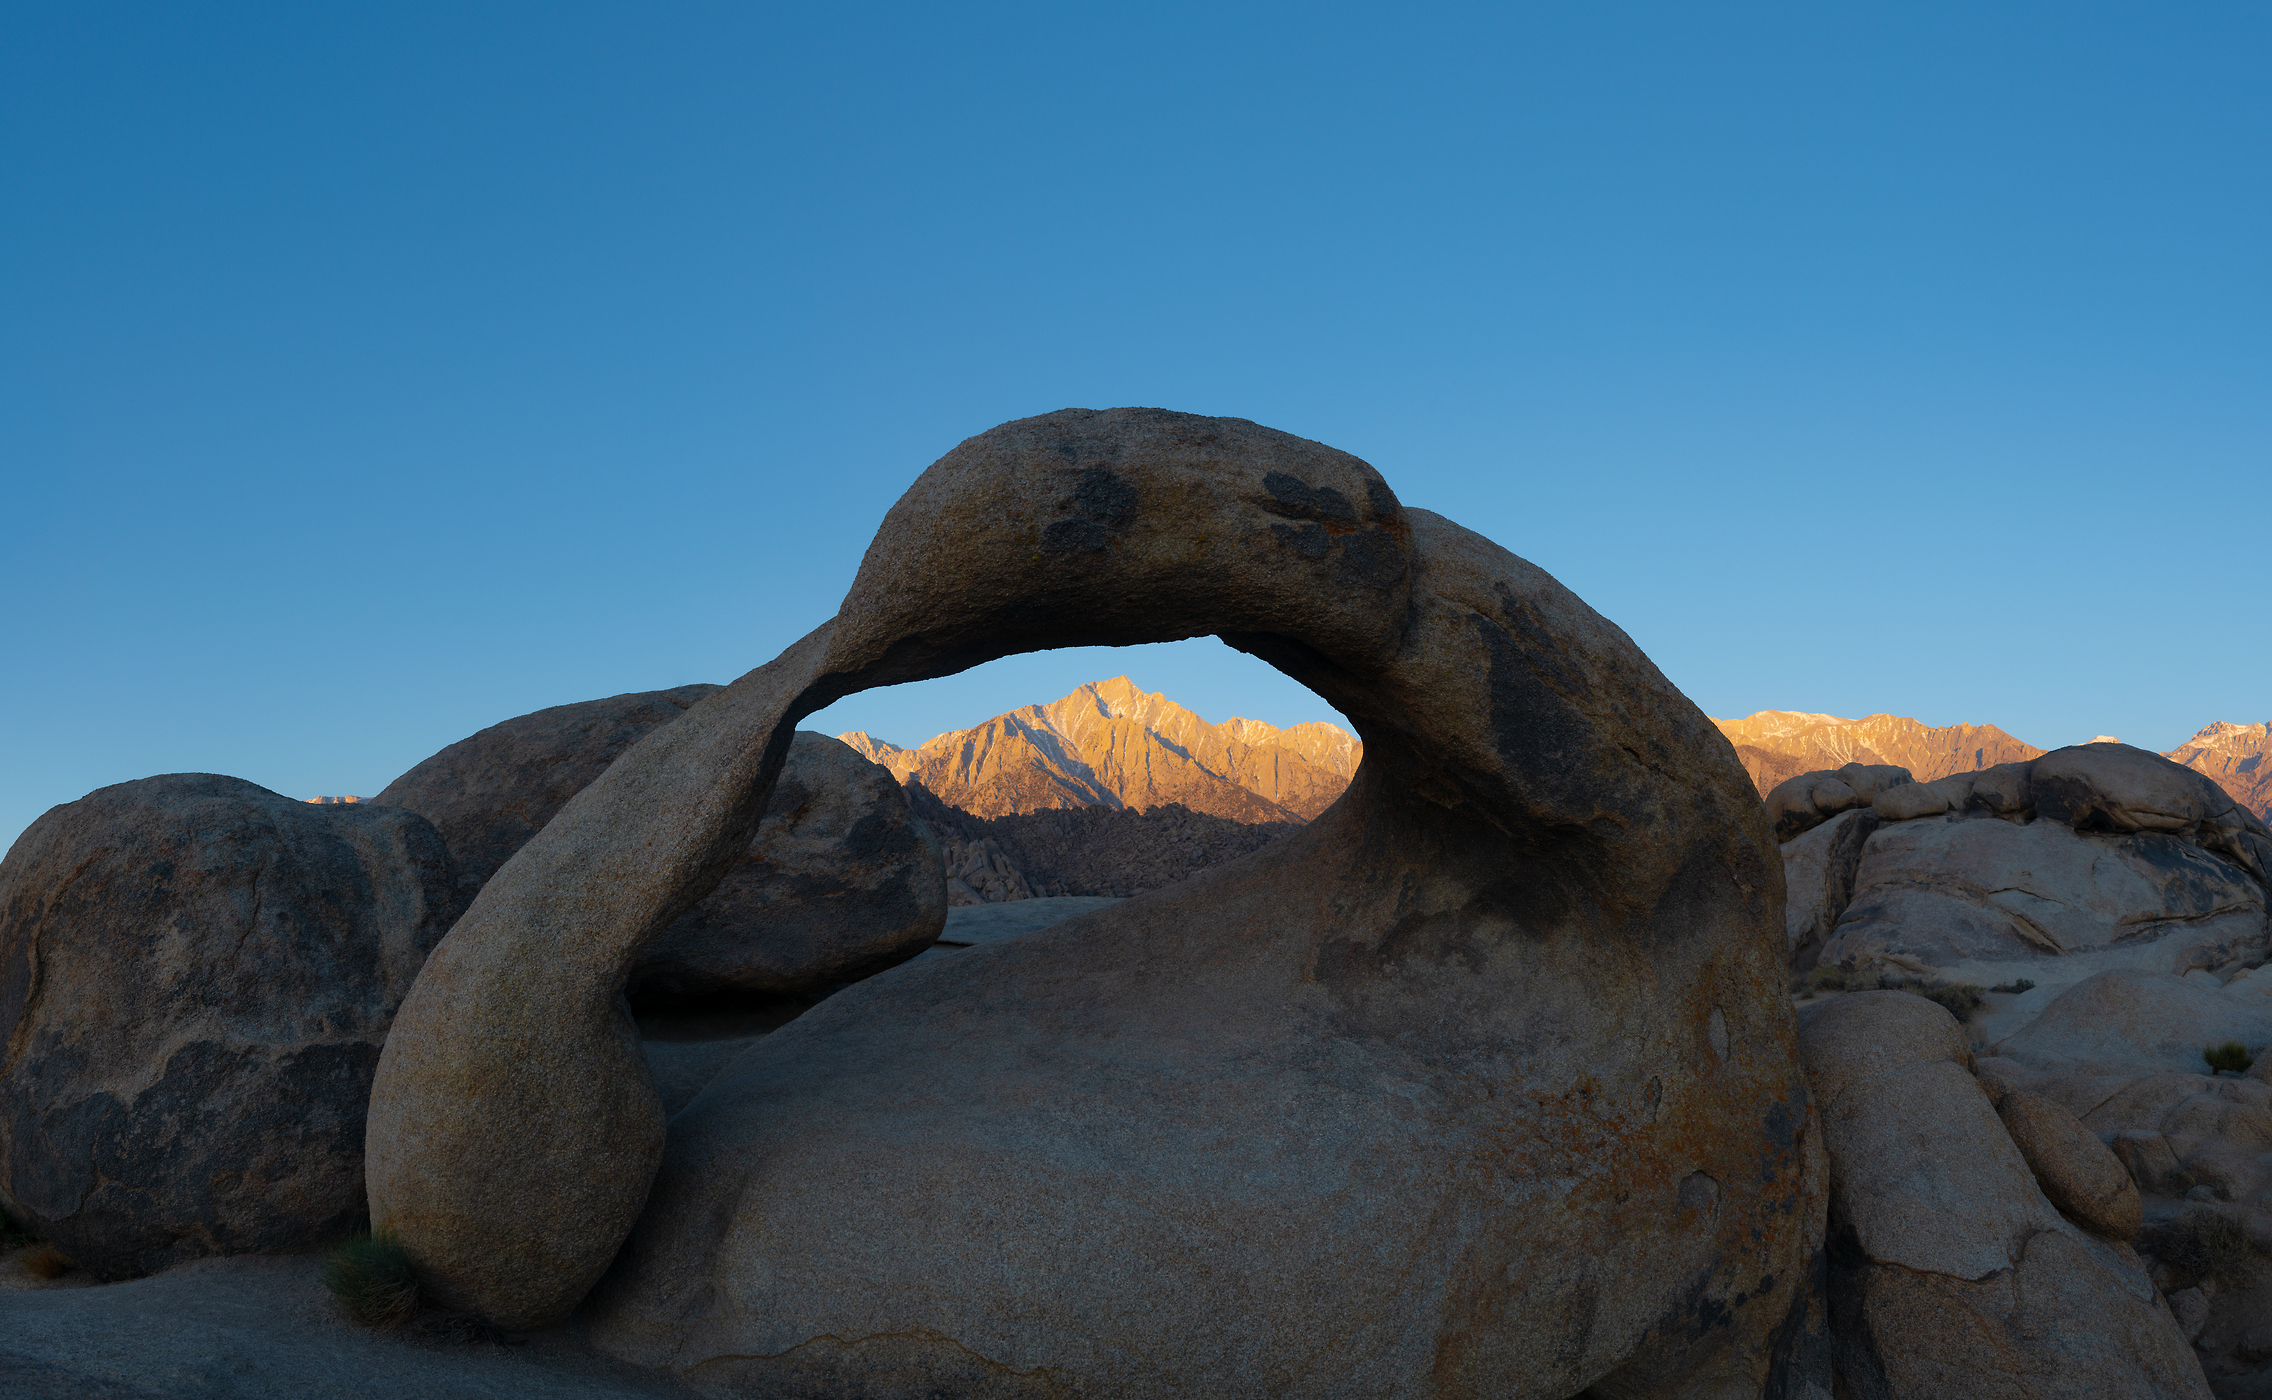 212 megapixels! A very high resolution, large-format VAST photo print of a rocky arch and mountain; landscape photograph created by Greg Probst in Alabama Hills Recreation Area, California.